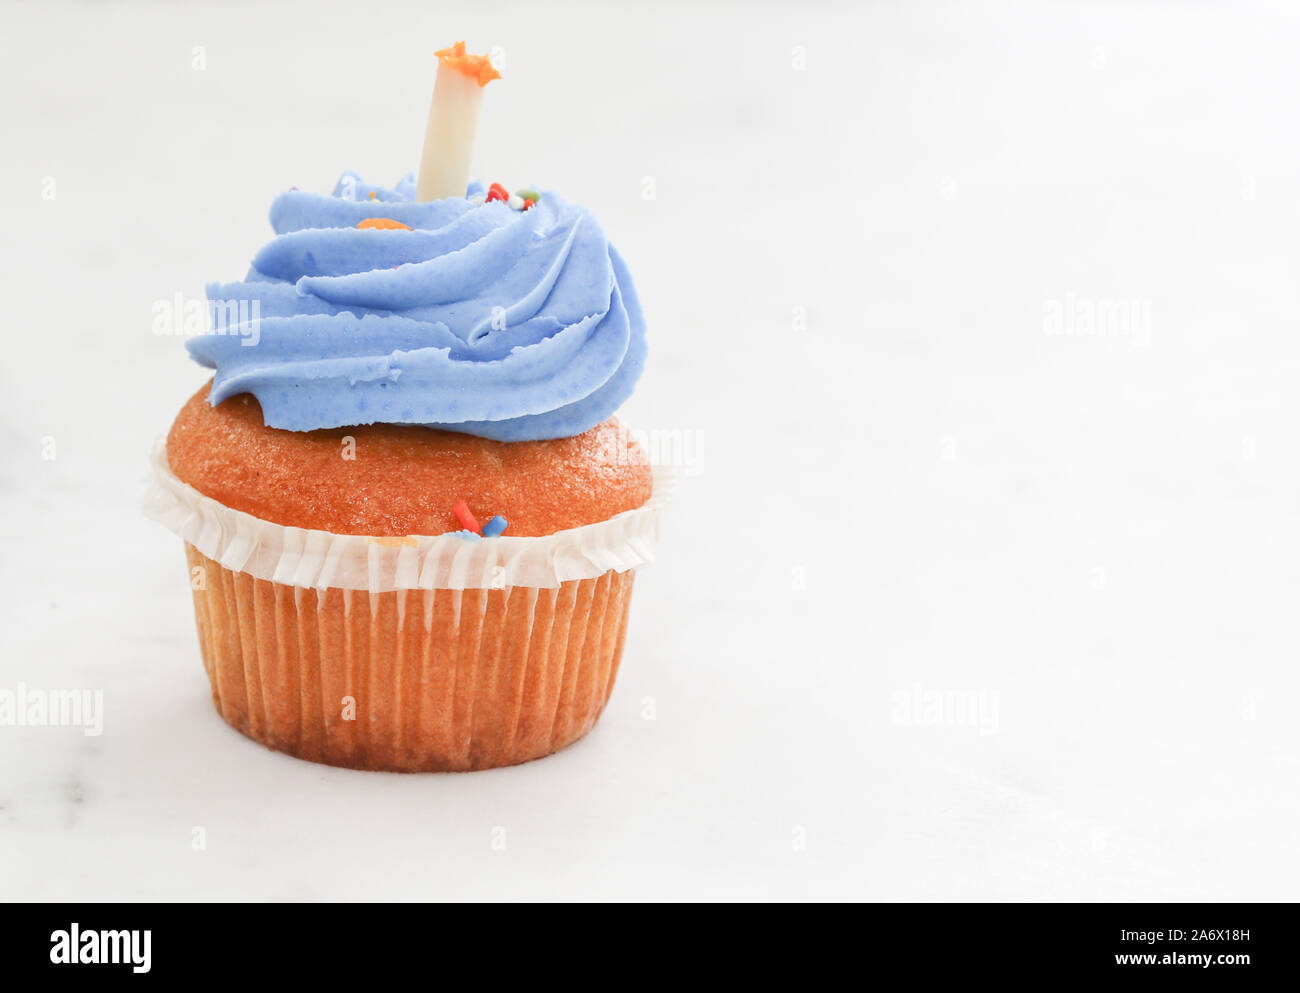 Teal birthday cupcake with butter cream icing isolated on white. - Image Stock Photo